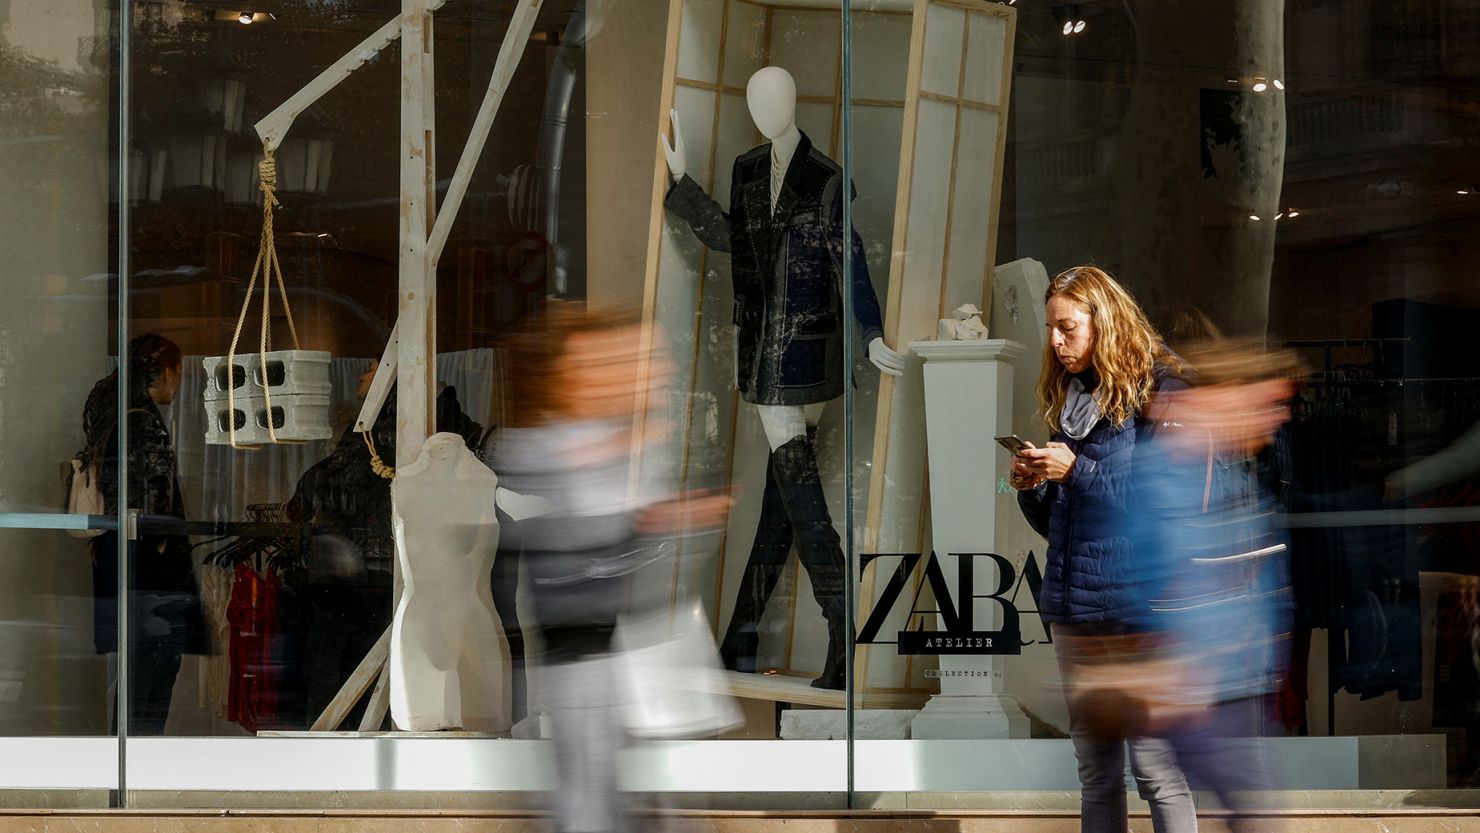 A Zara shop in Barcelona, Spain, seen on December 11. Social media users have called for a boycott of Zara over its ad campaign that they said referenced the Gaza war.